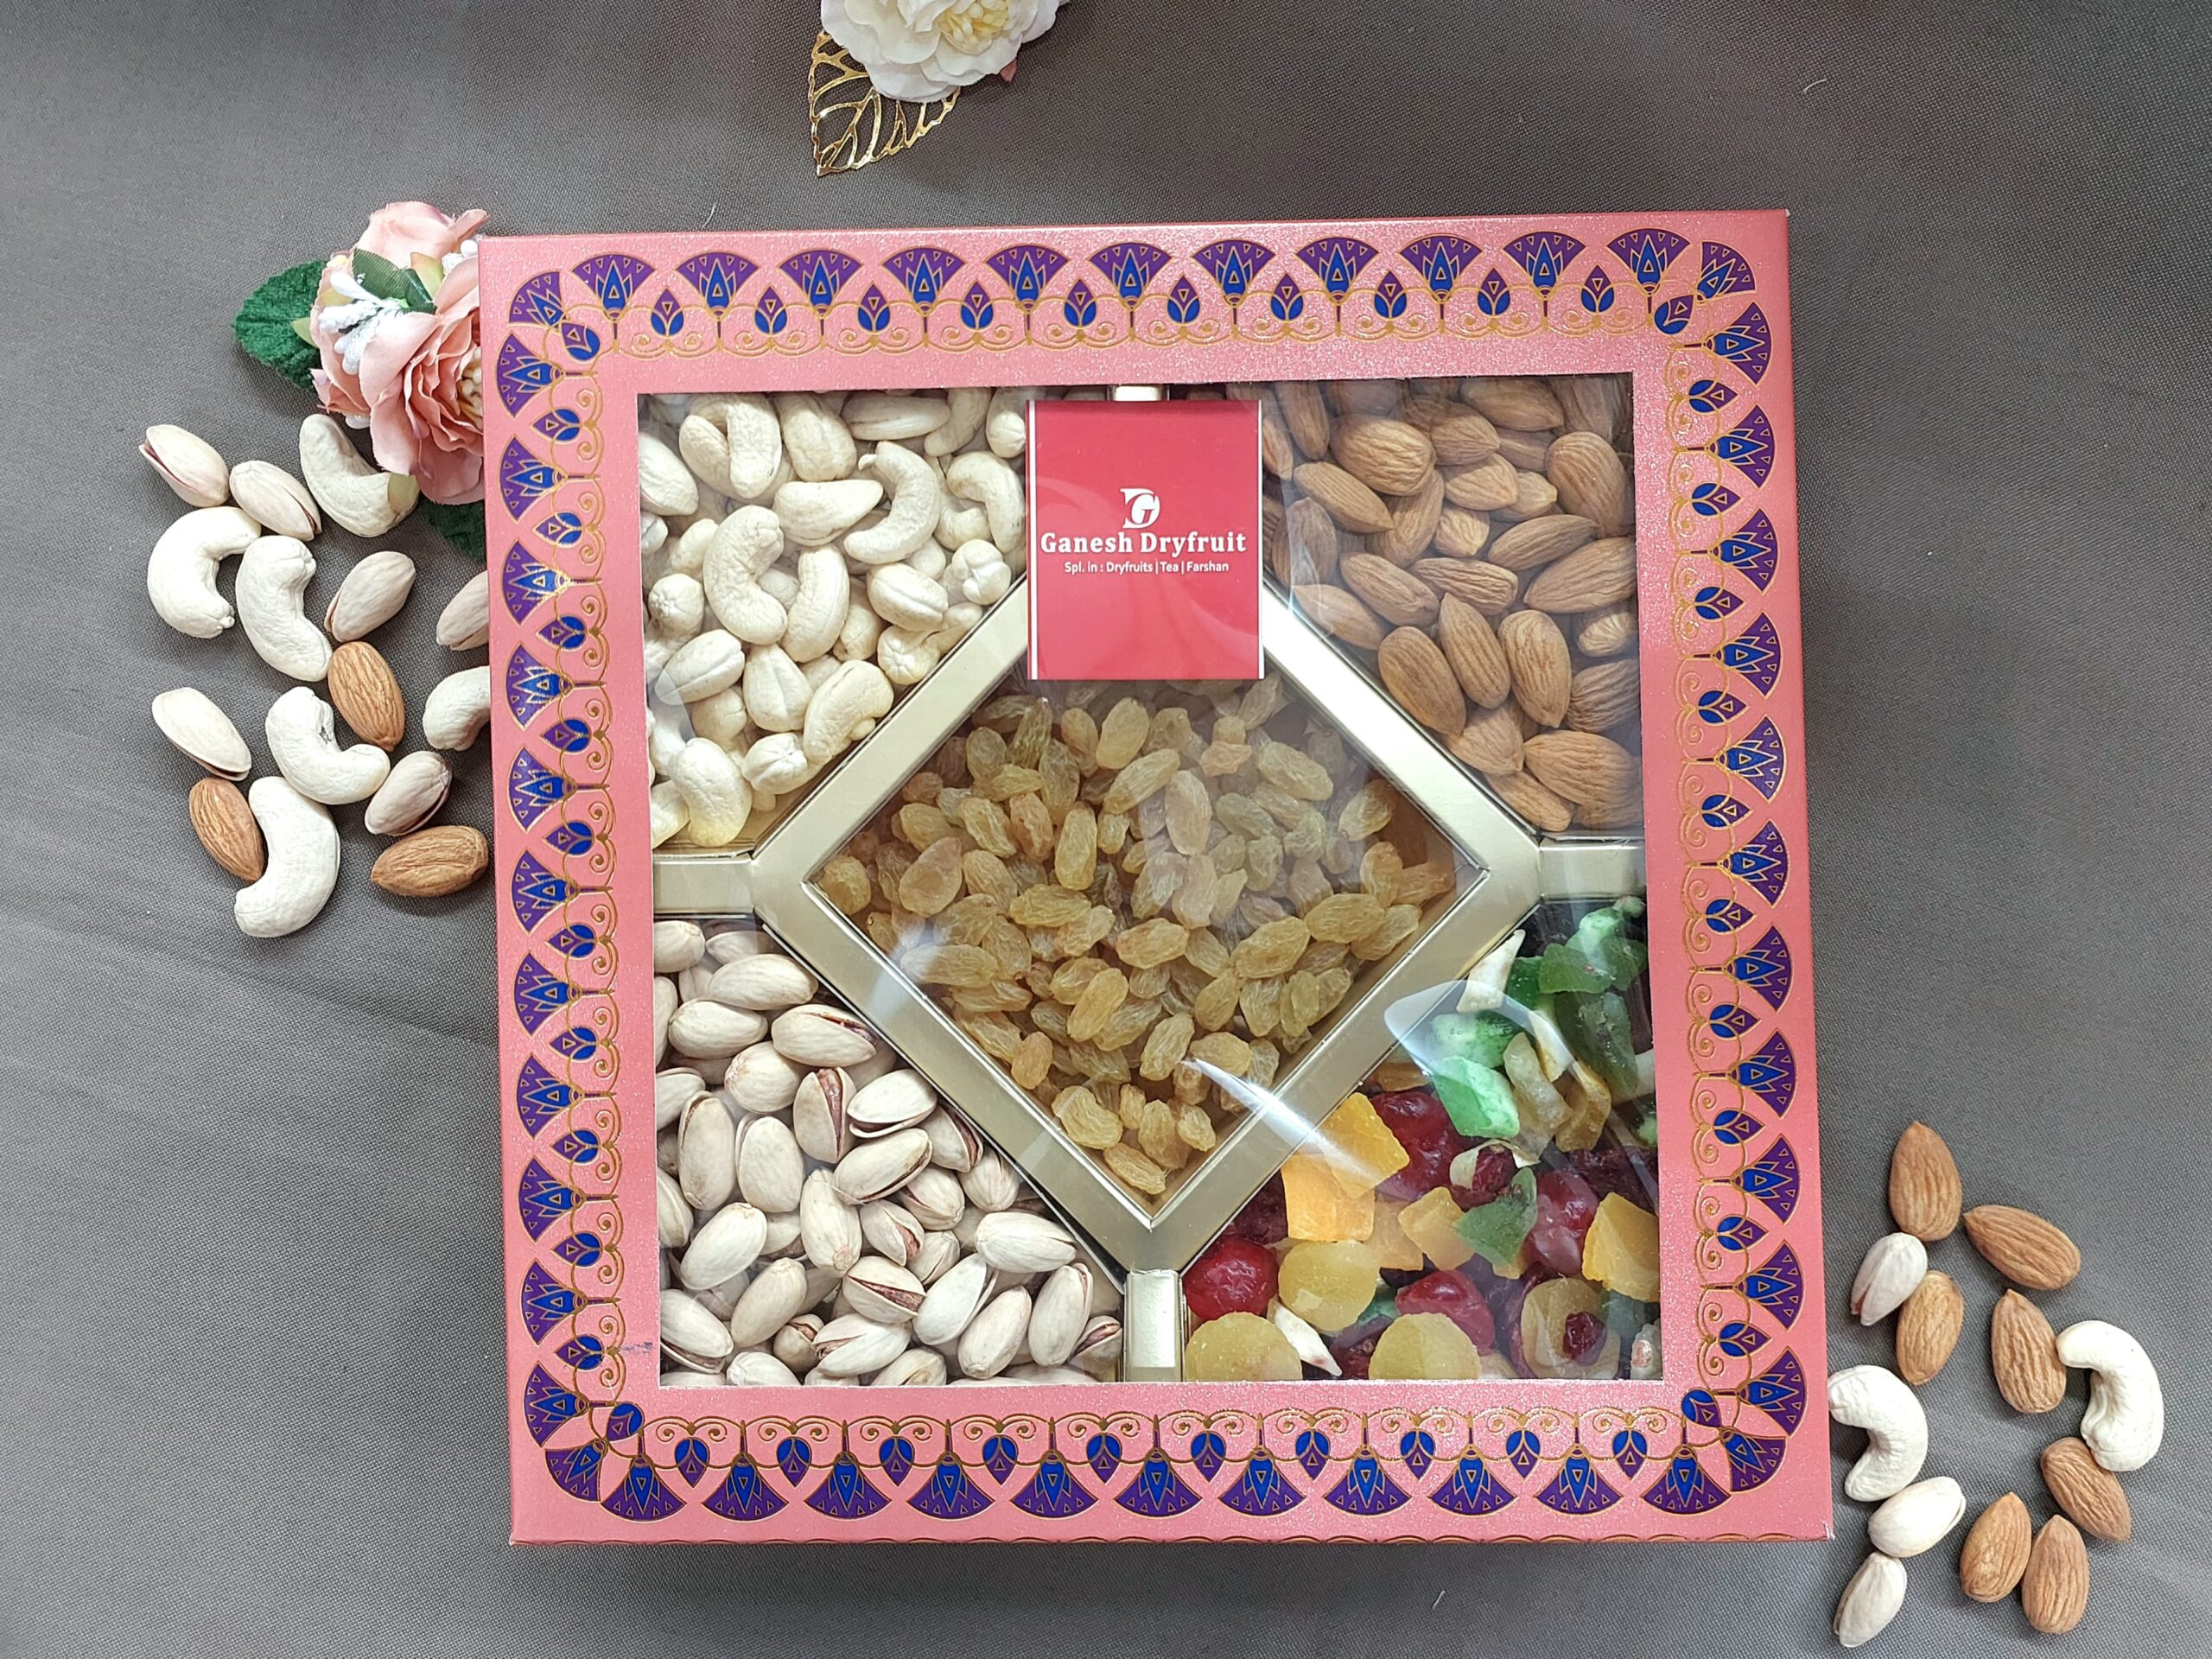 product-grid-gallery-item Dryfruits Gift Box